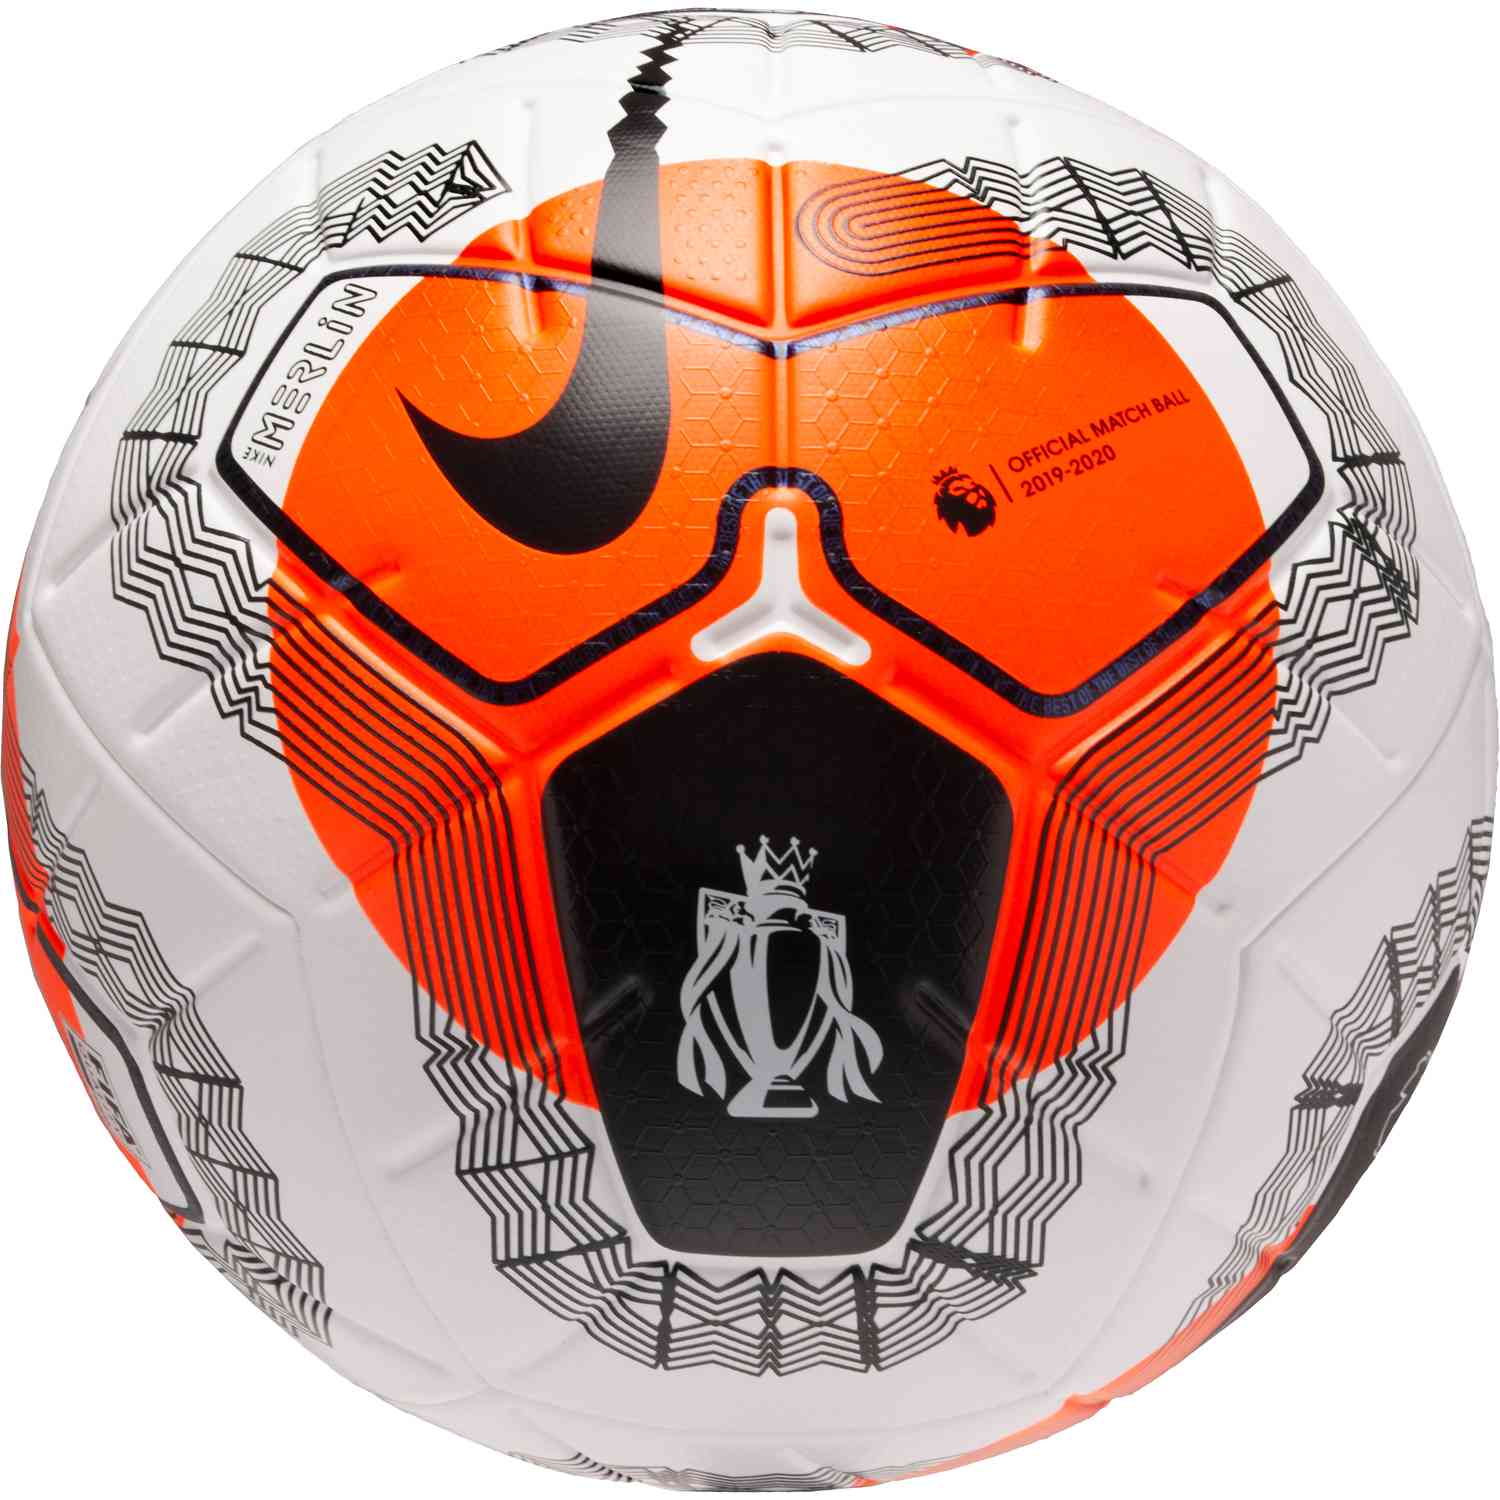 Nike Premier League Merlin Official Match Soccer Ball - White with ...